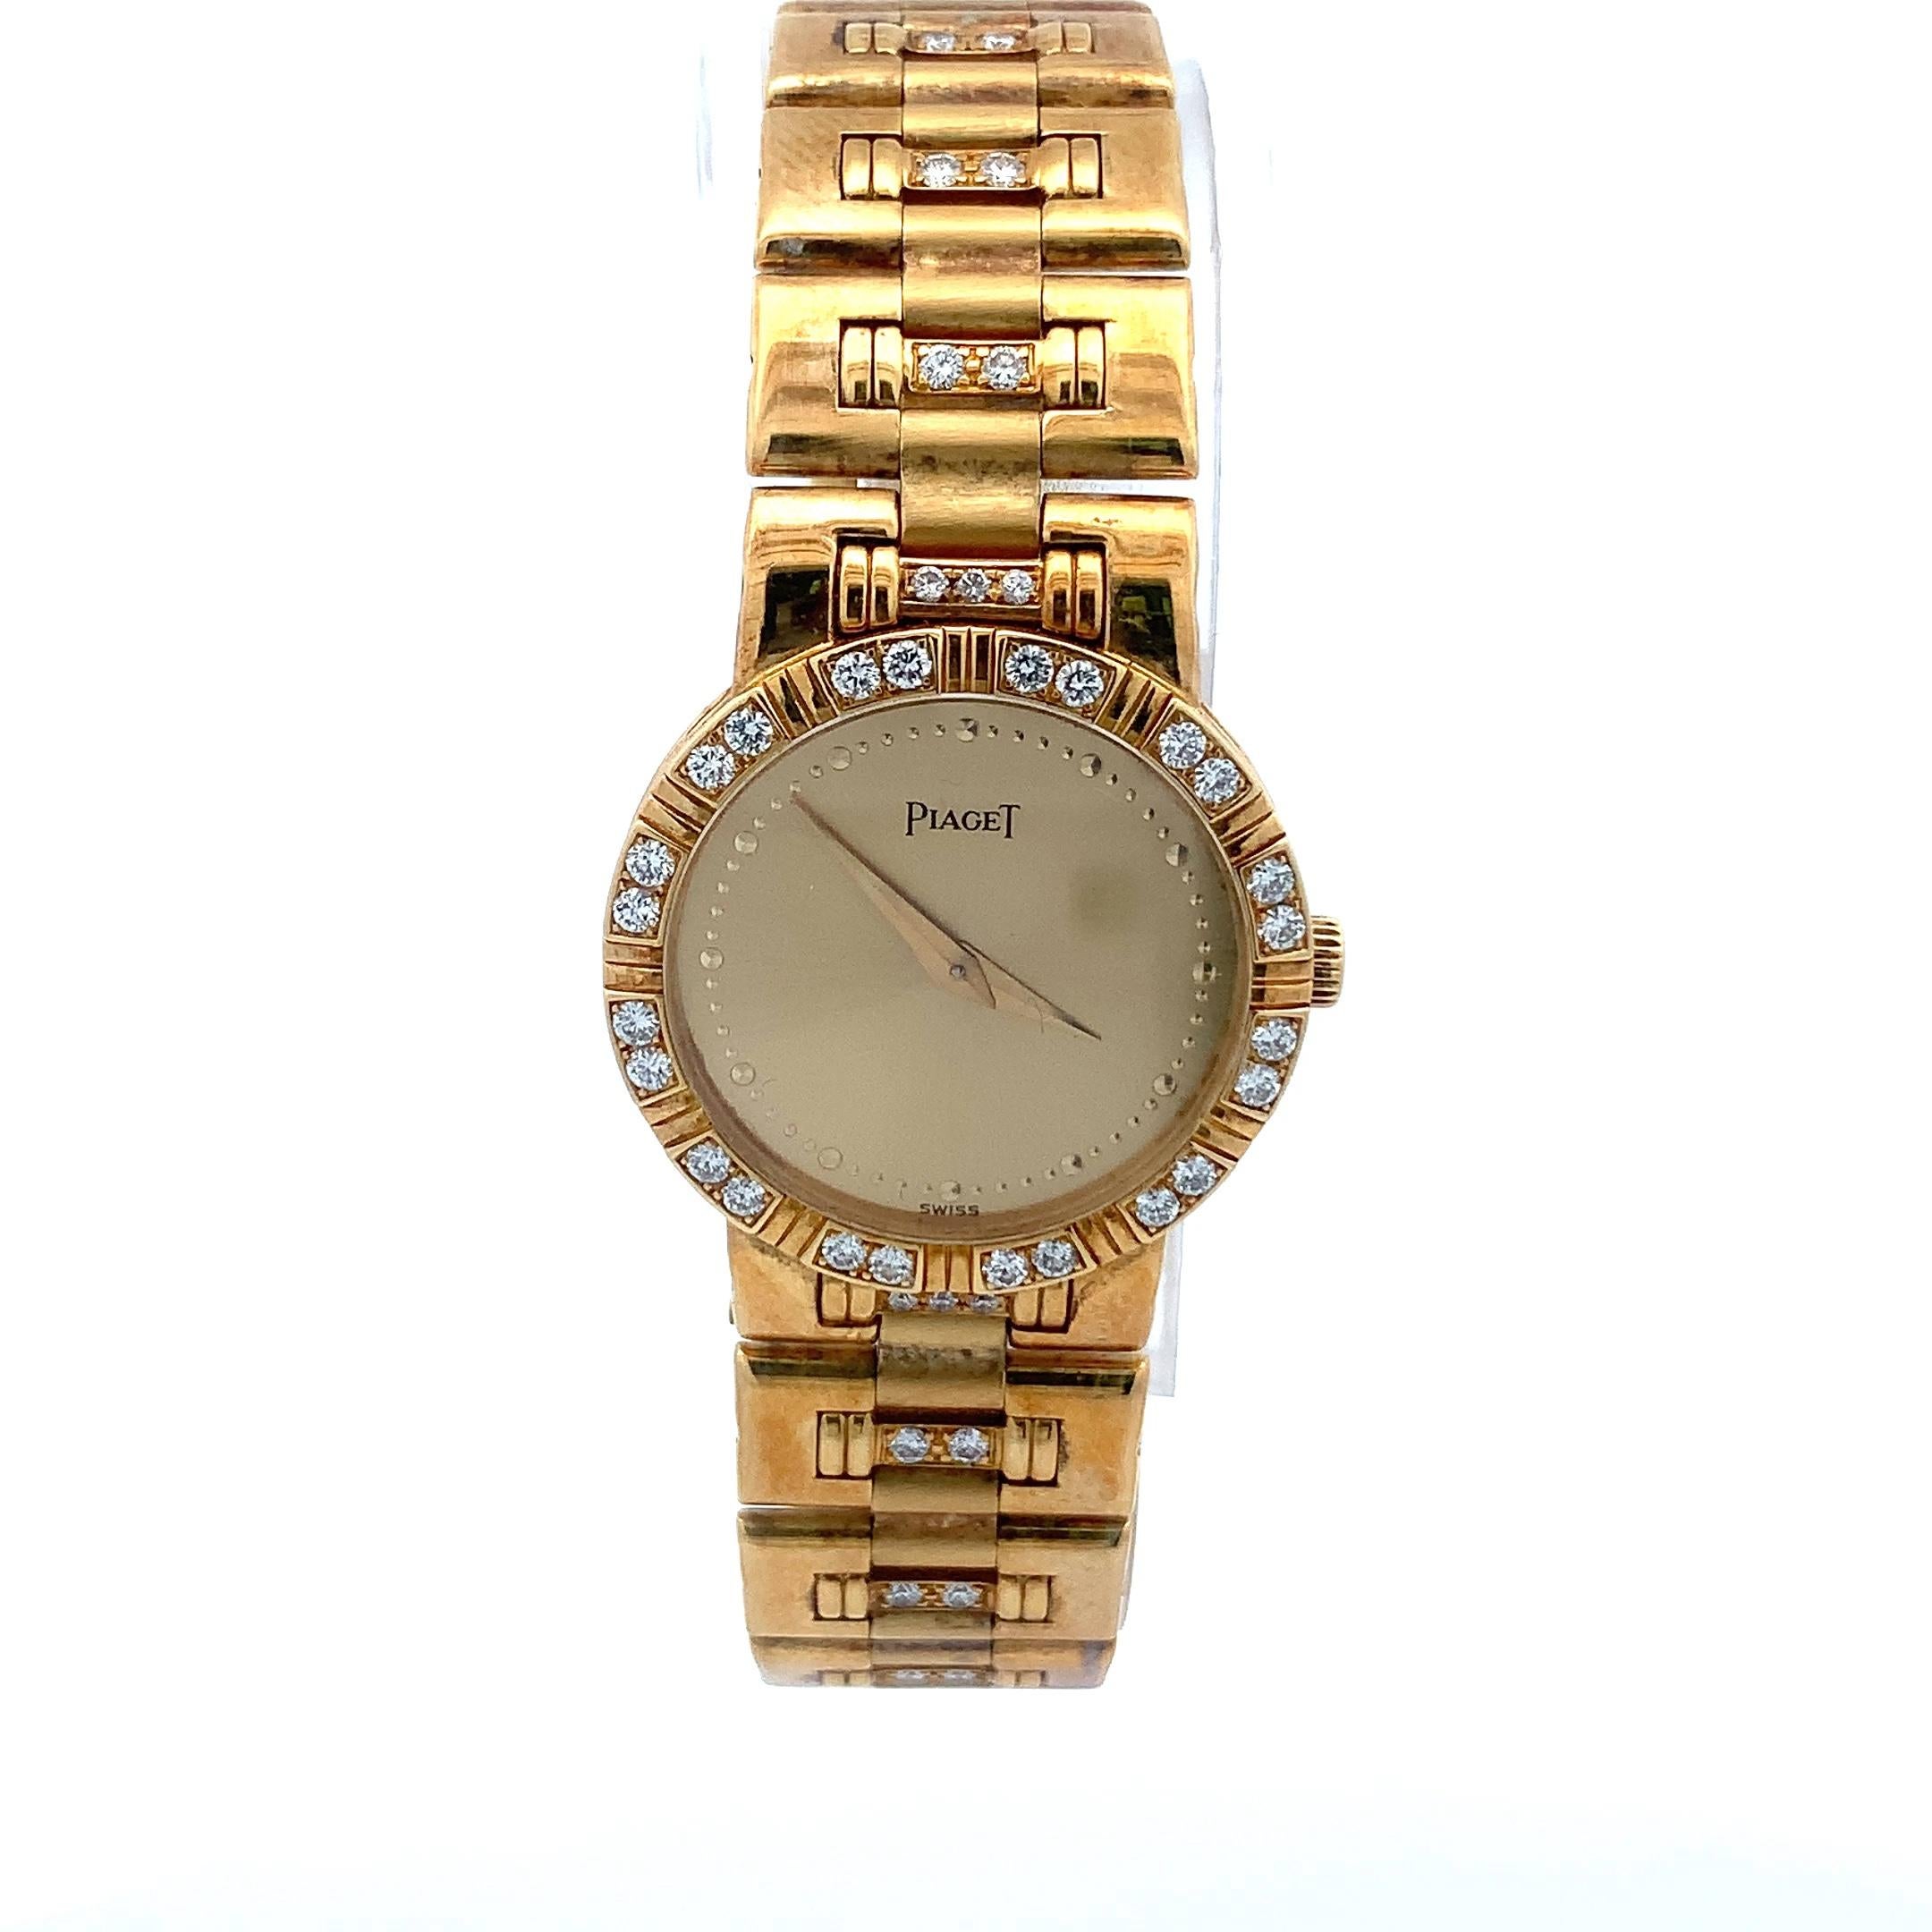 Preowned, excellent condition Piaget Lady Dancer 18k Yellow Gold wristwatch. Gold dial, an 18k Yellow Gold 20mm case, diamond bezel, winder, bracelet and jewellery clasp, sapphire crystal glass and quartz movement
This watch is a symbol of pure